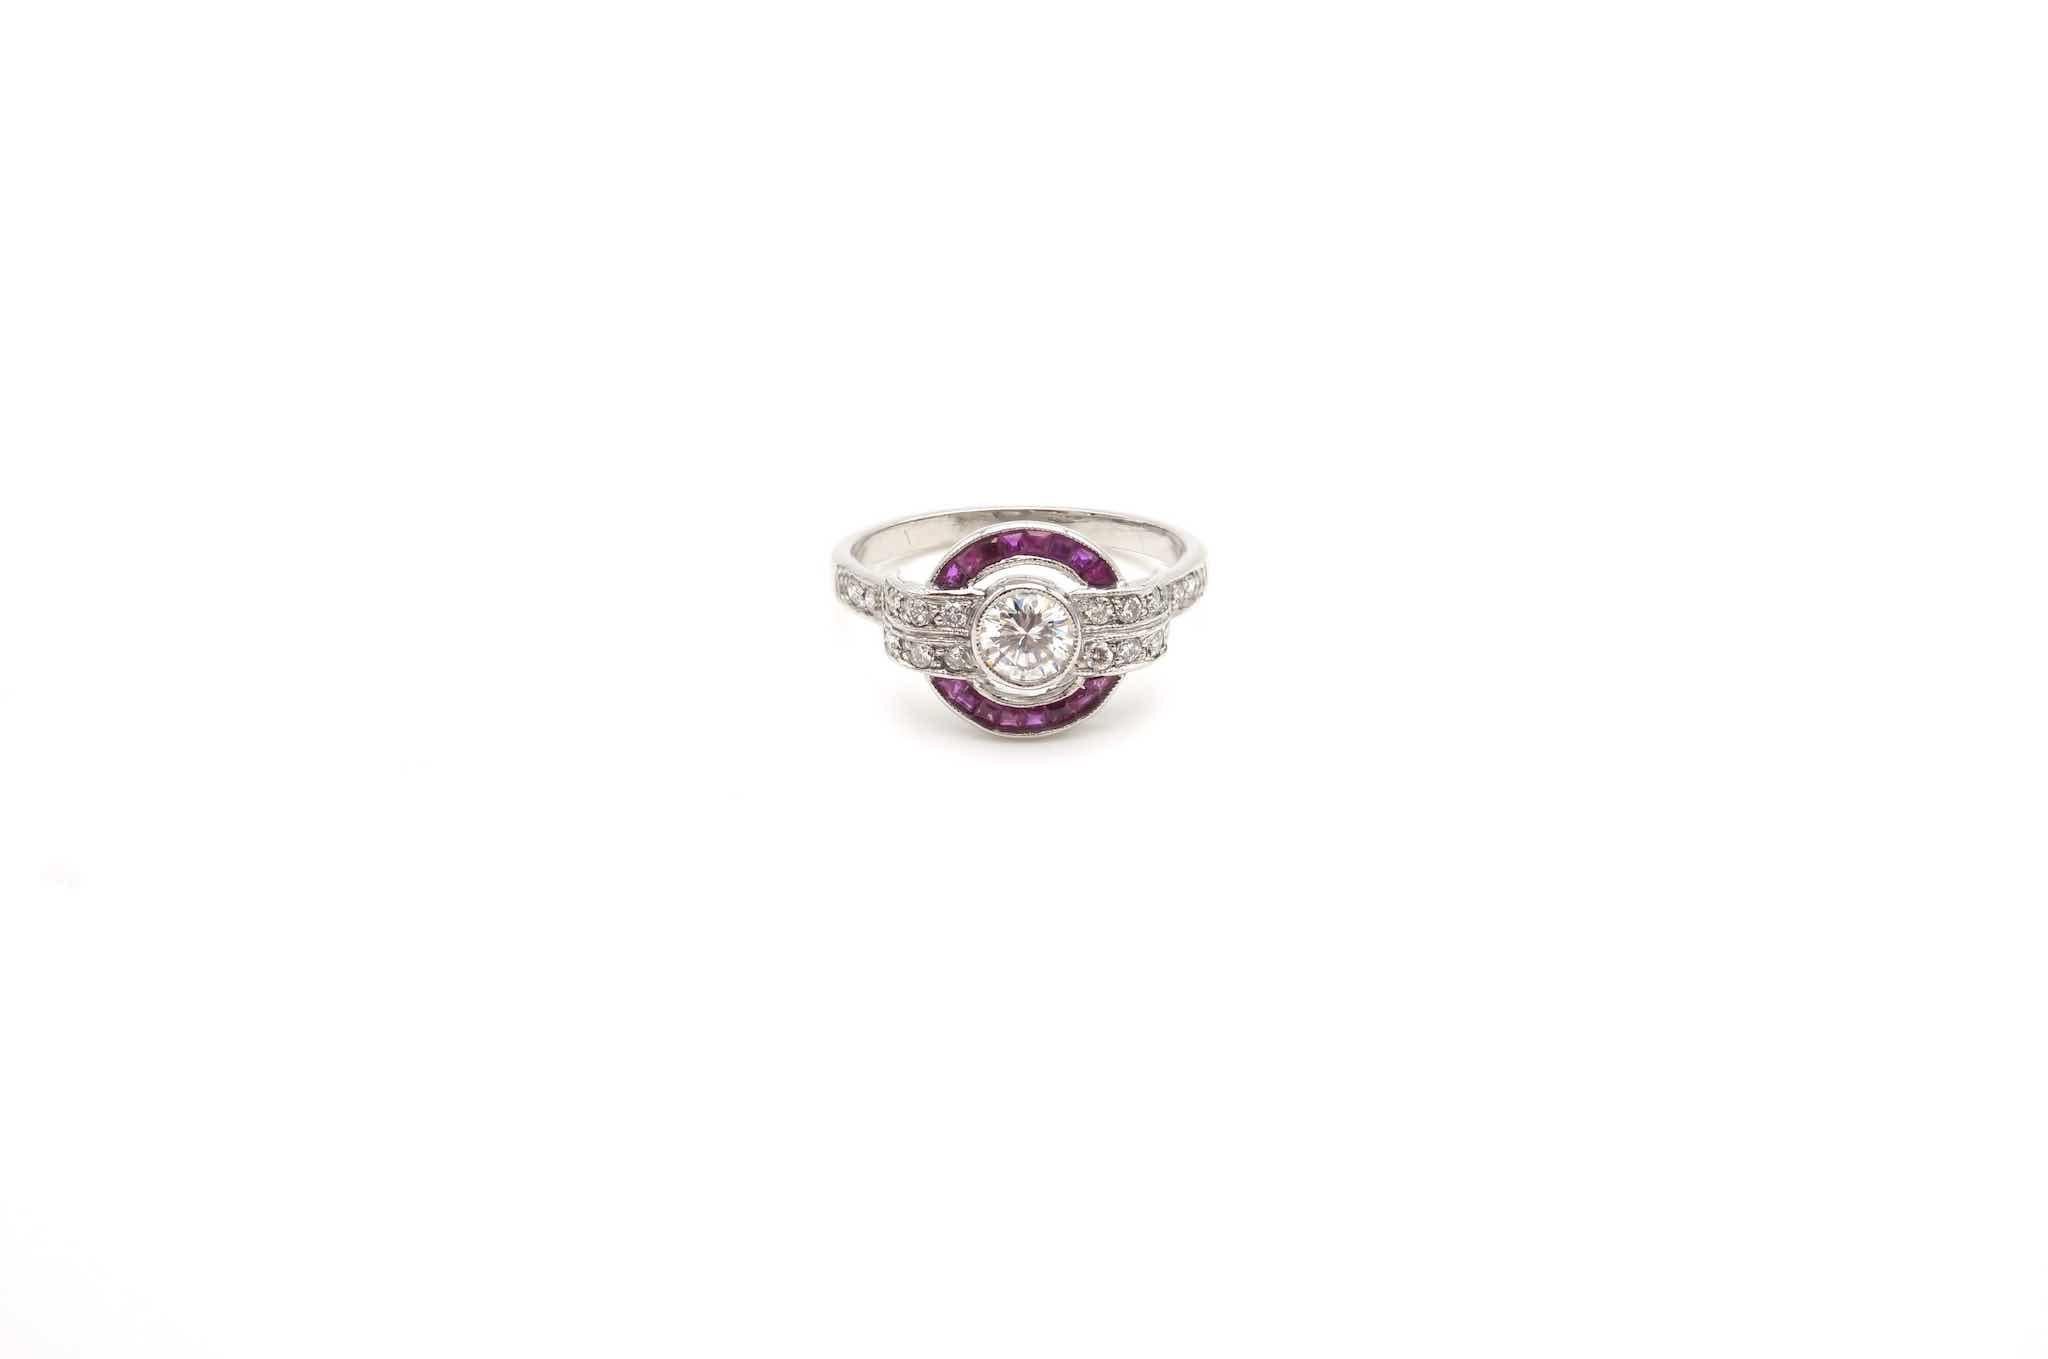 Stones: Diamonds for a total weight of 0.50 carats and rubies.
Material: Platinum
Dimensions: Diameter of 1cm
Period: 1930
Weight: 3.9g
Size: 52 (free sizing)
Certificate
Ref. : 24722